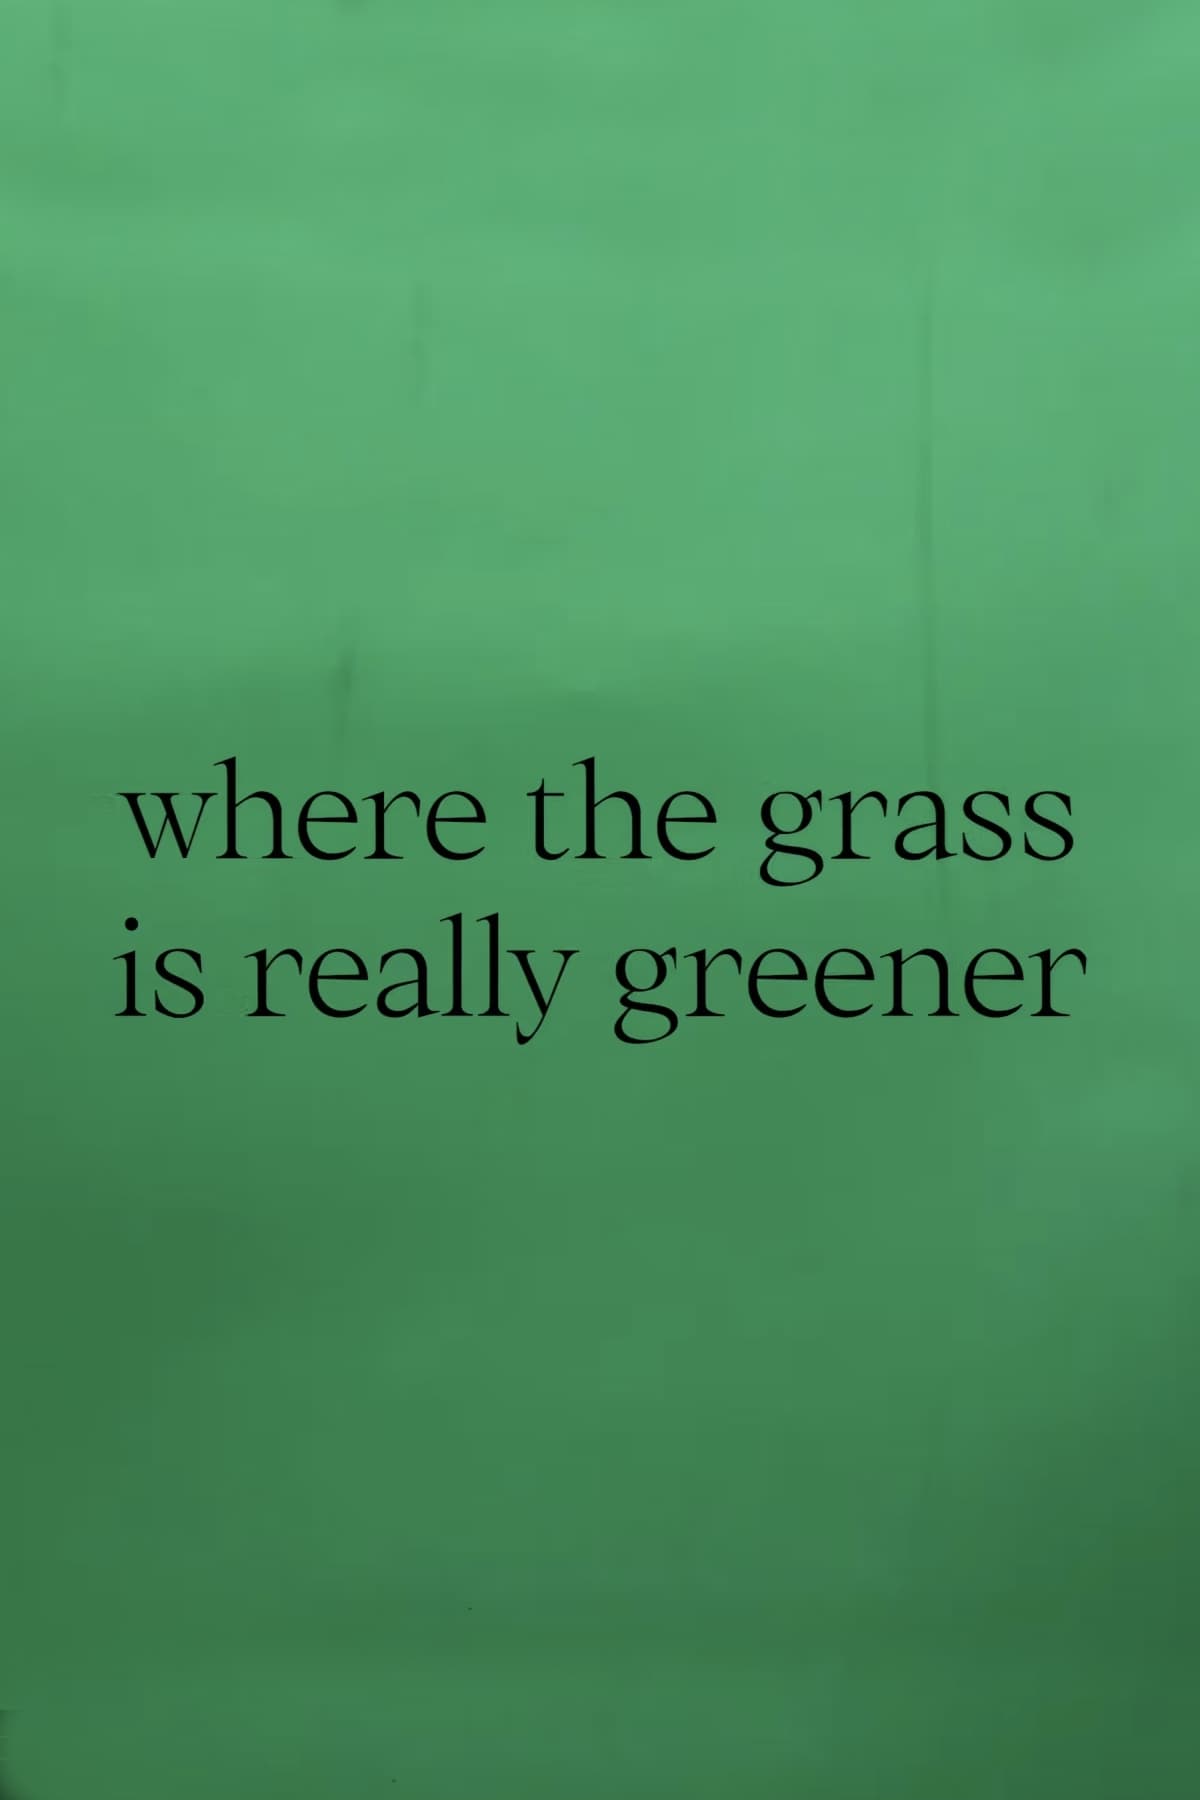 where the grass is really greener